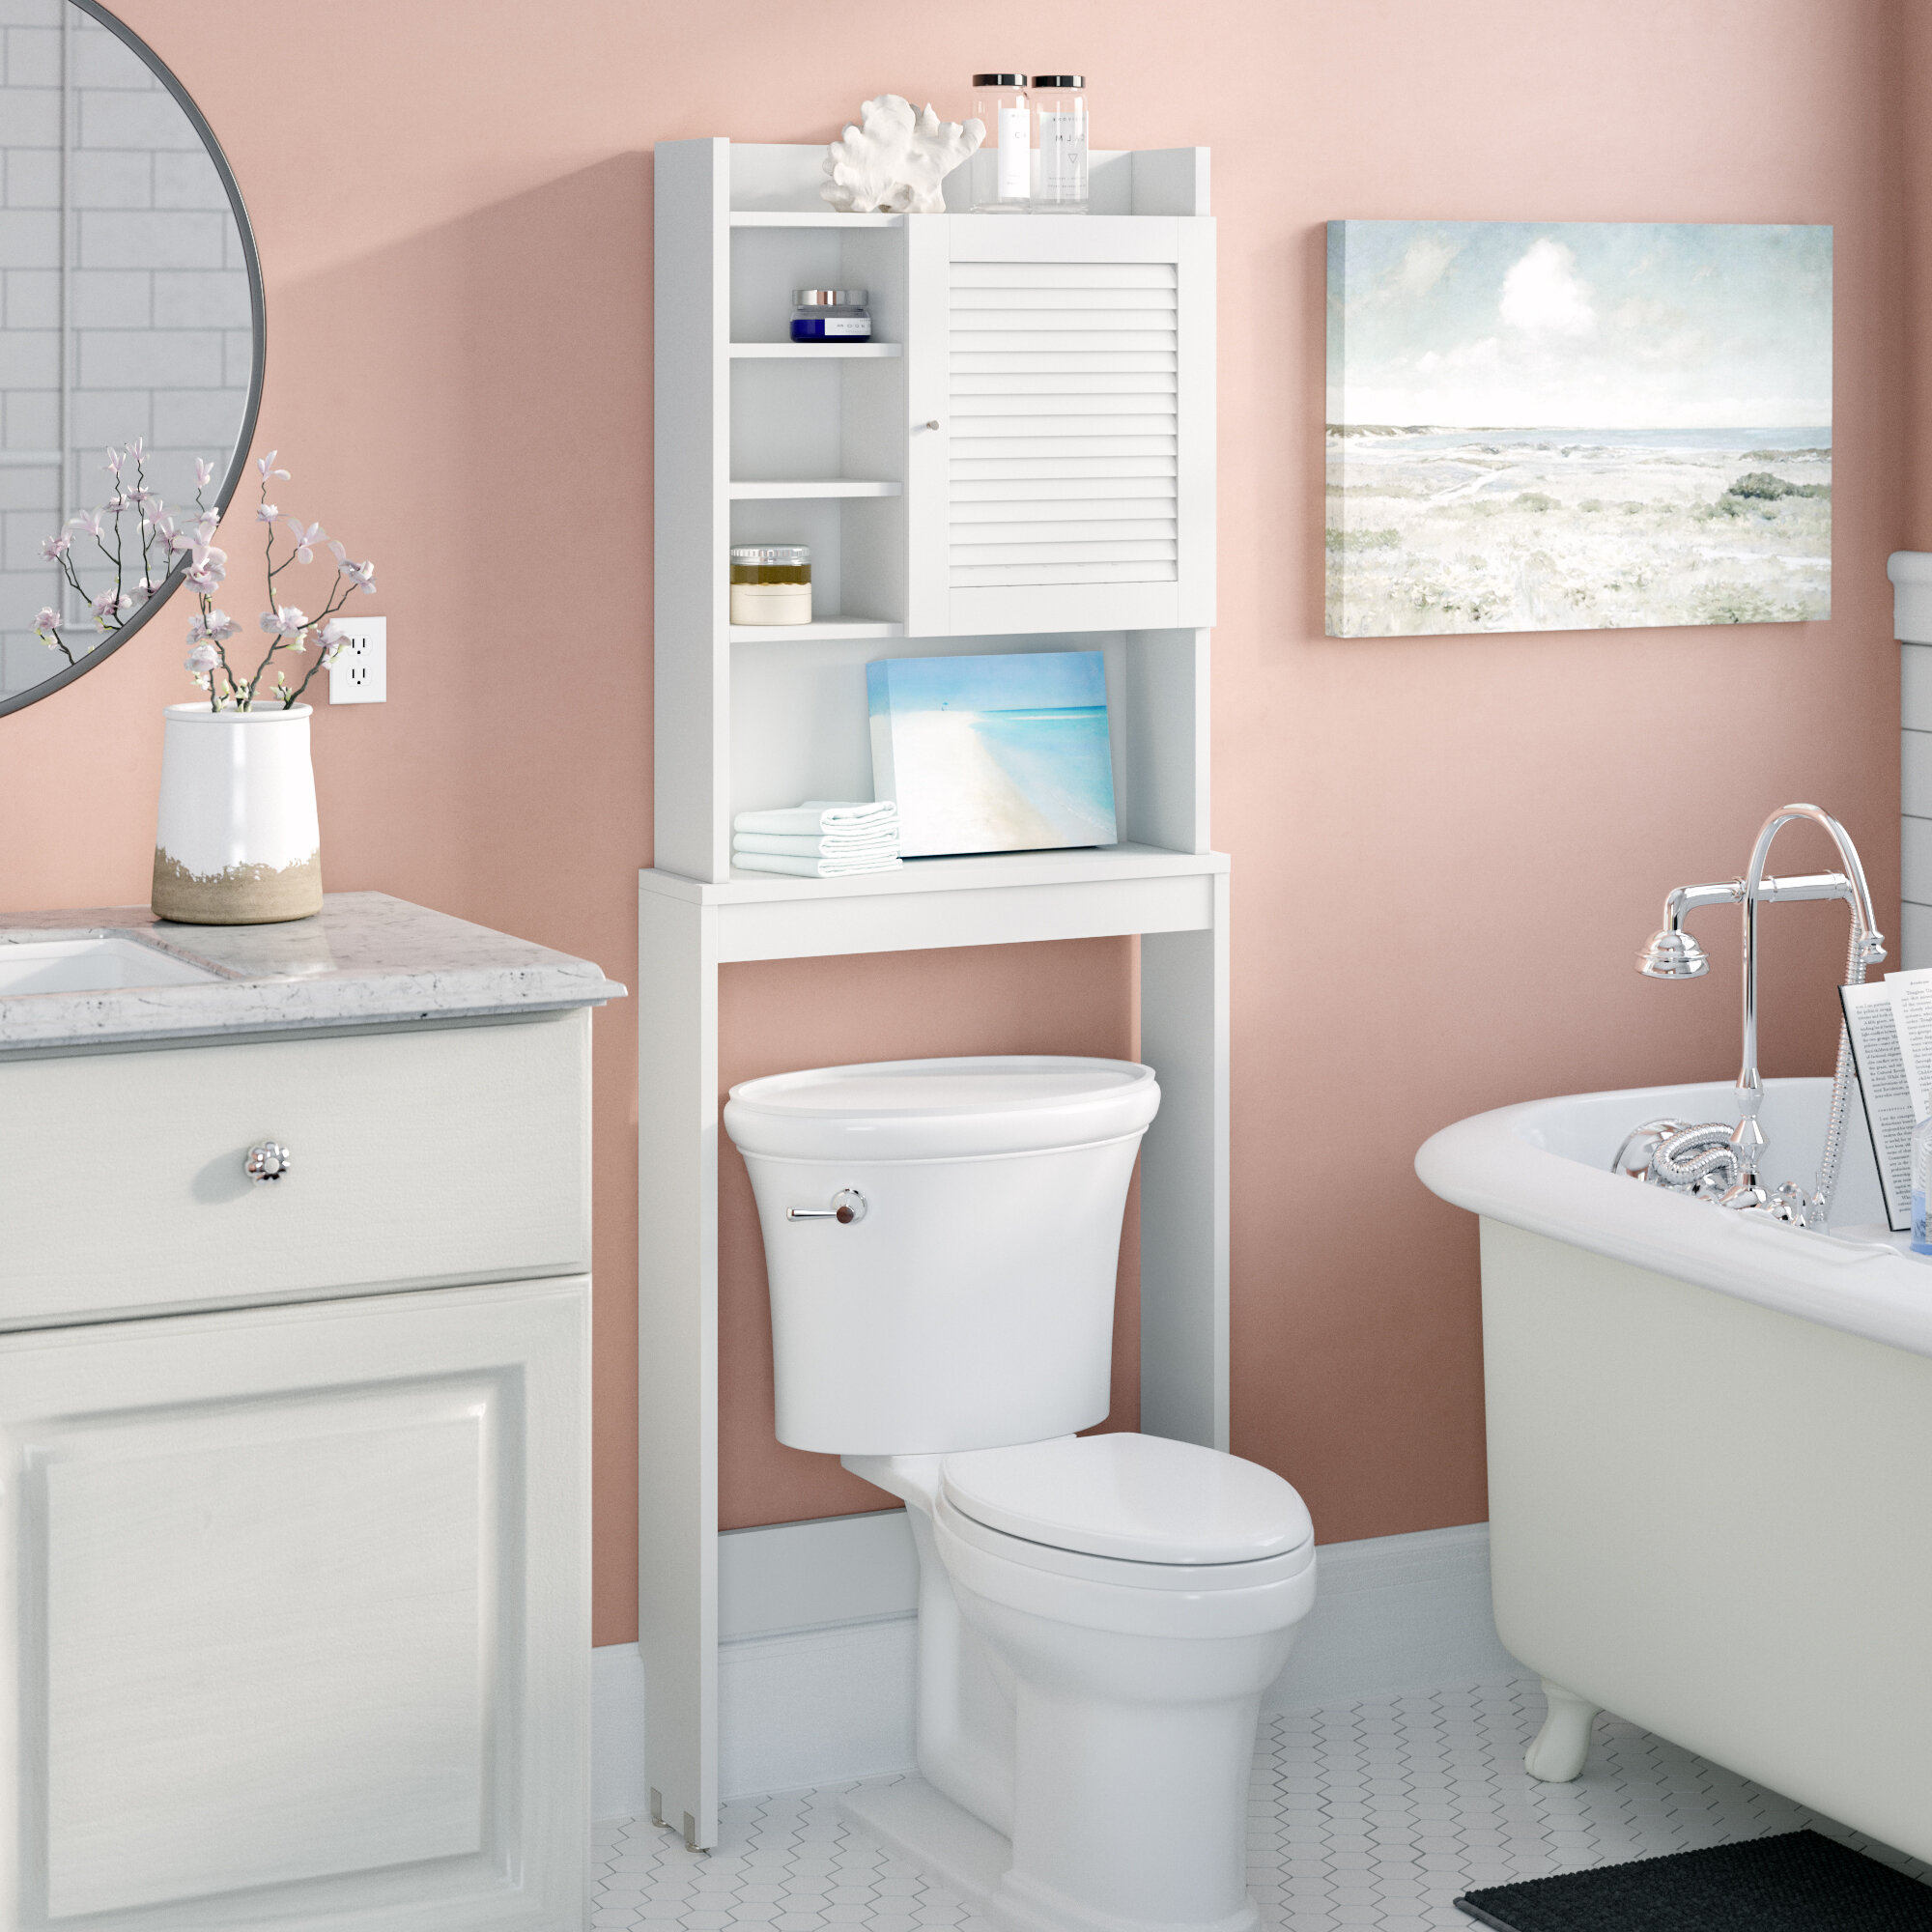 Three Posts™ Pinecrest Freestanding Over-the-Toilet Storage & Reviews